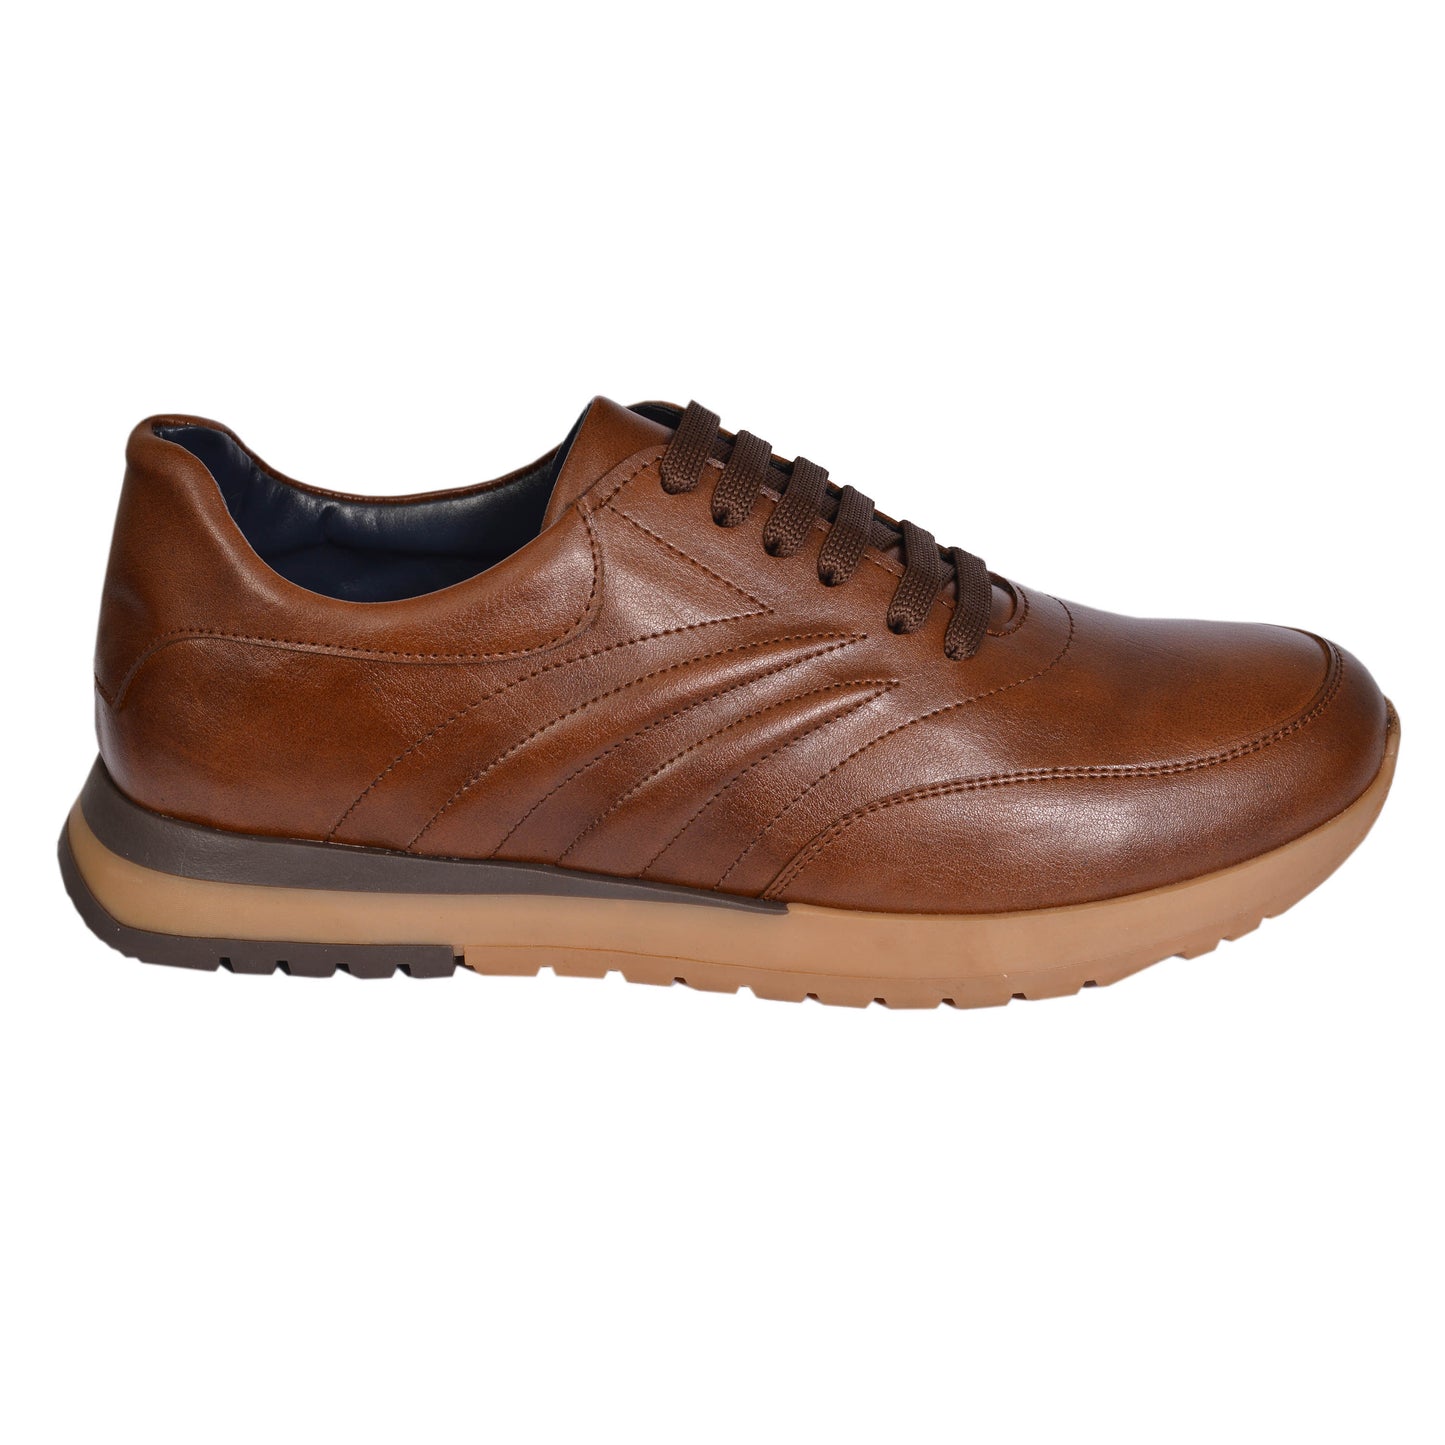 2H #9506 Brown Casual Shoes